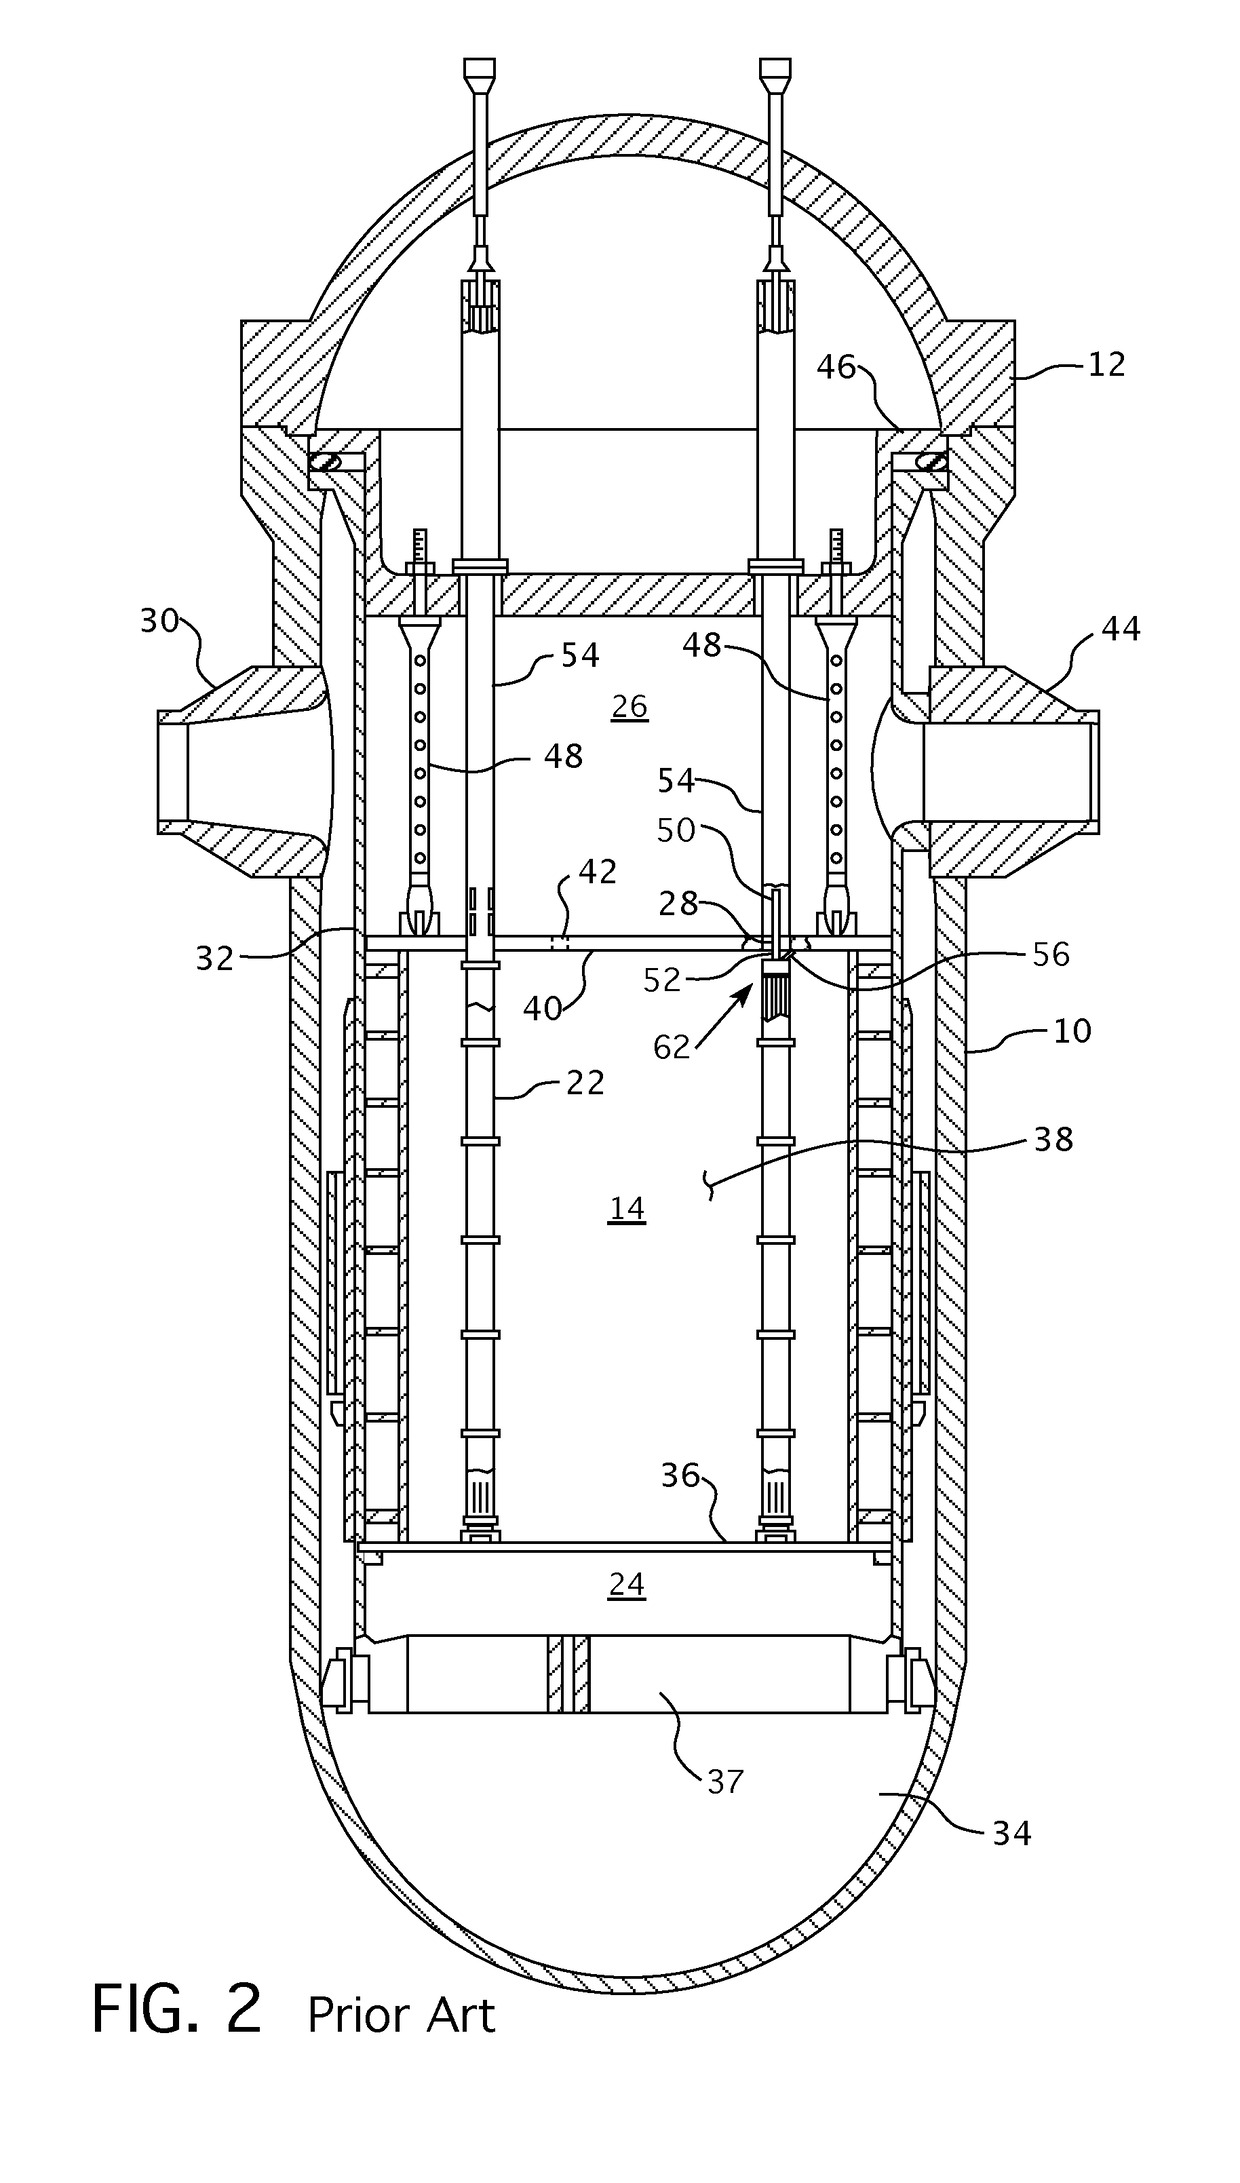 Real-time reactor coolant system boron concentration monitor utilizing an ultrasonic spectroscpopy system